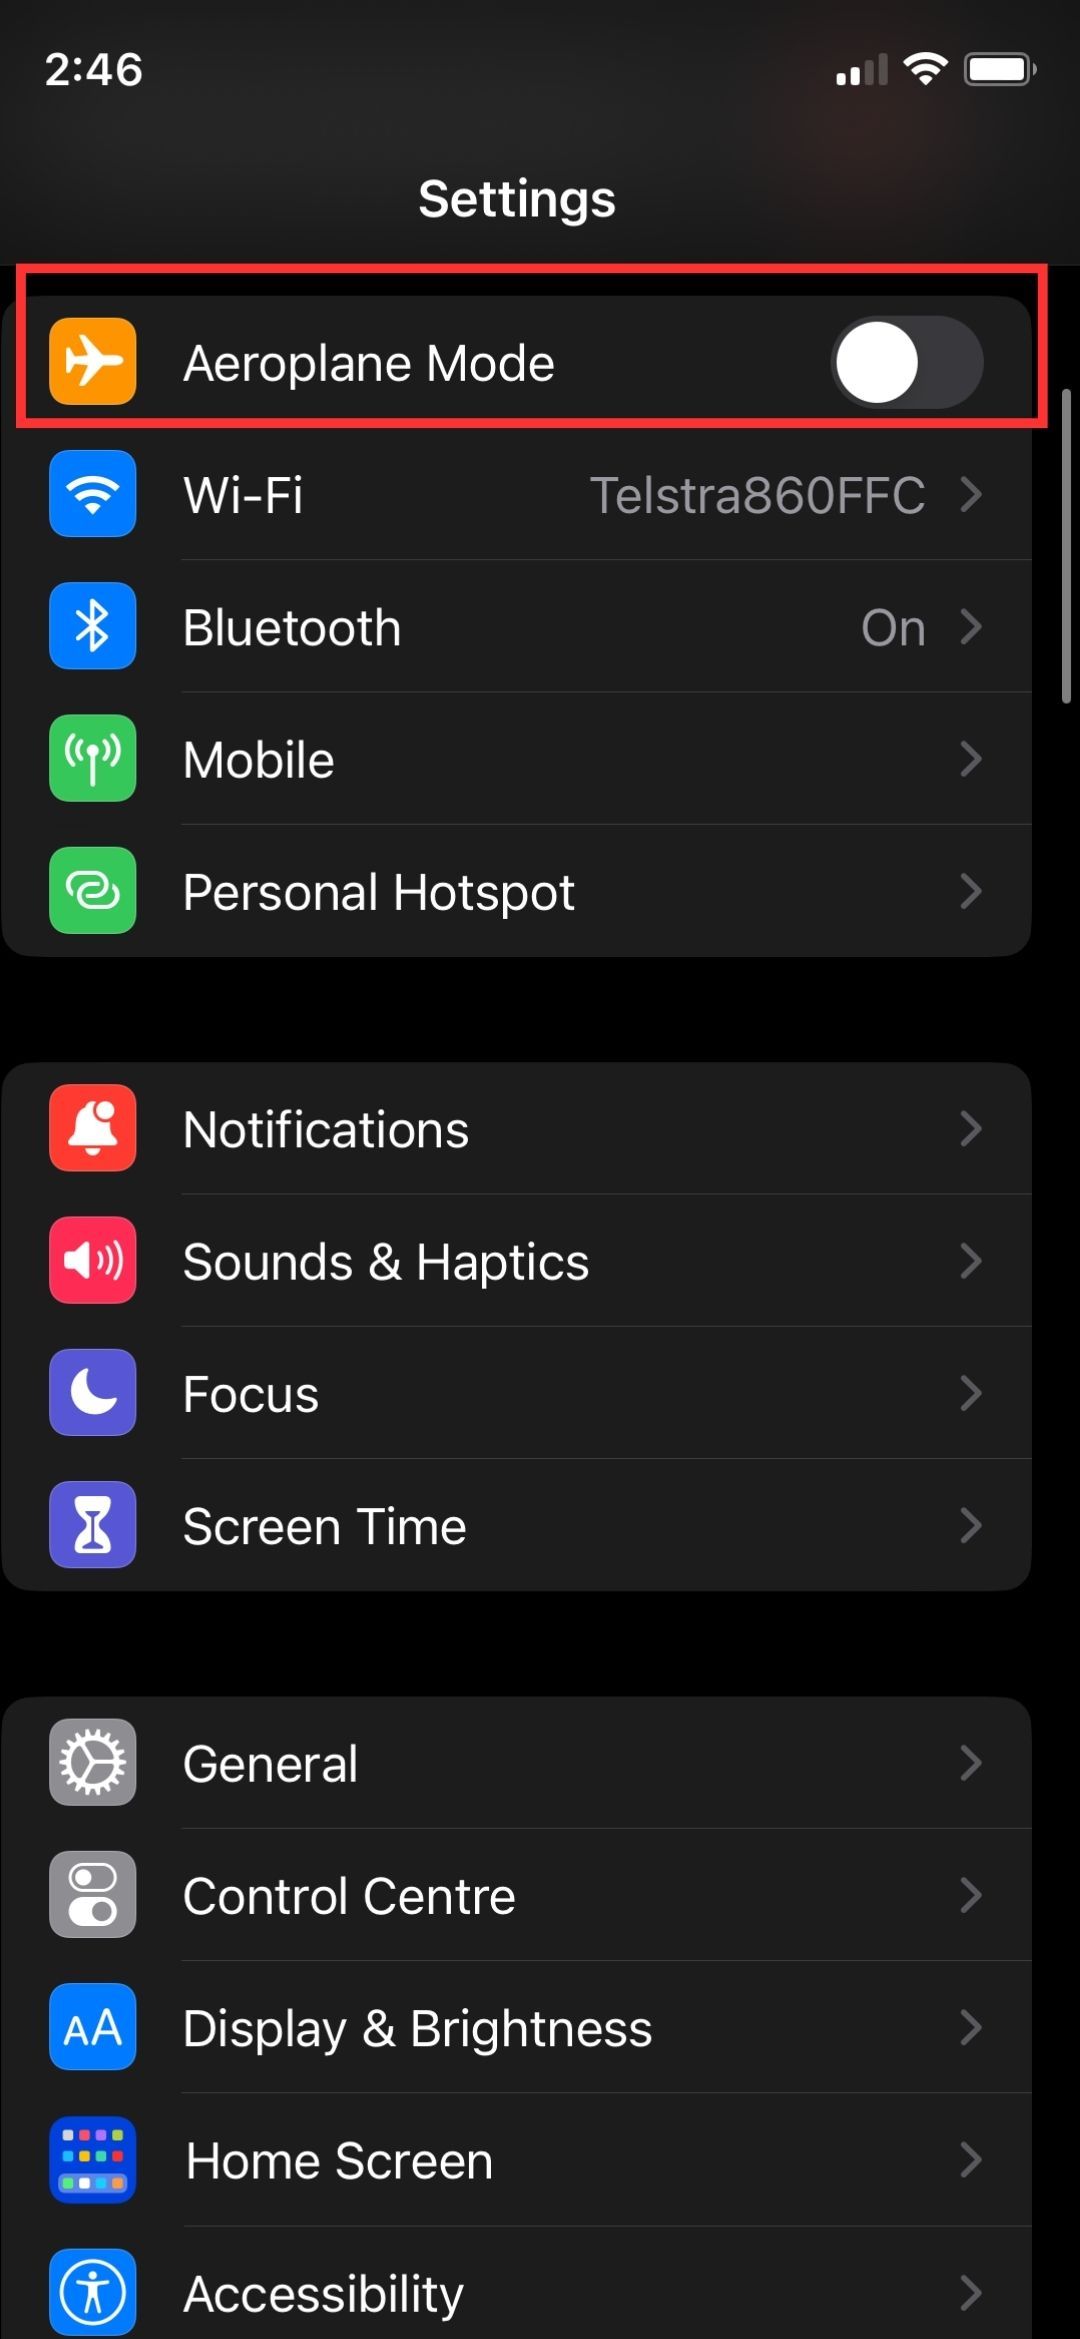 IPhone Airplane Mode from Settings